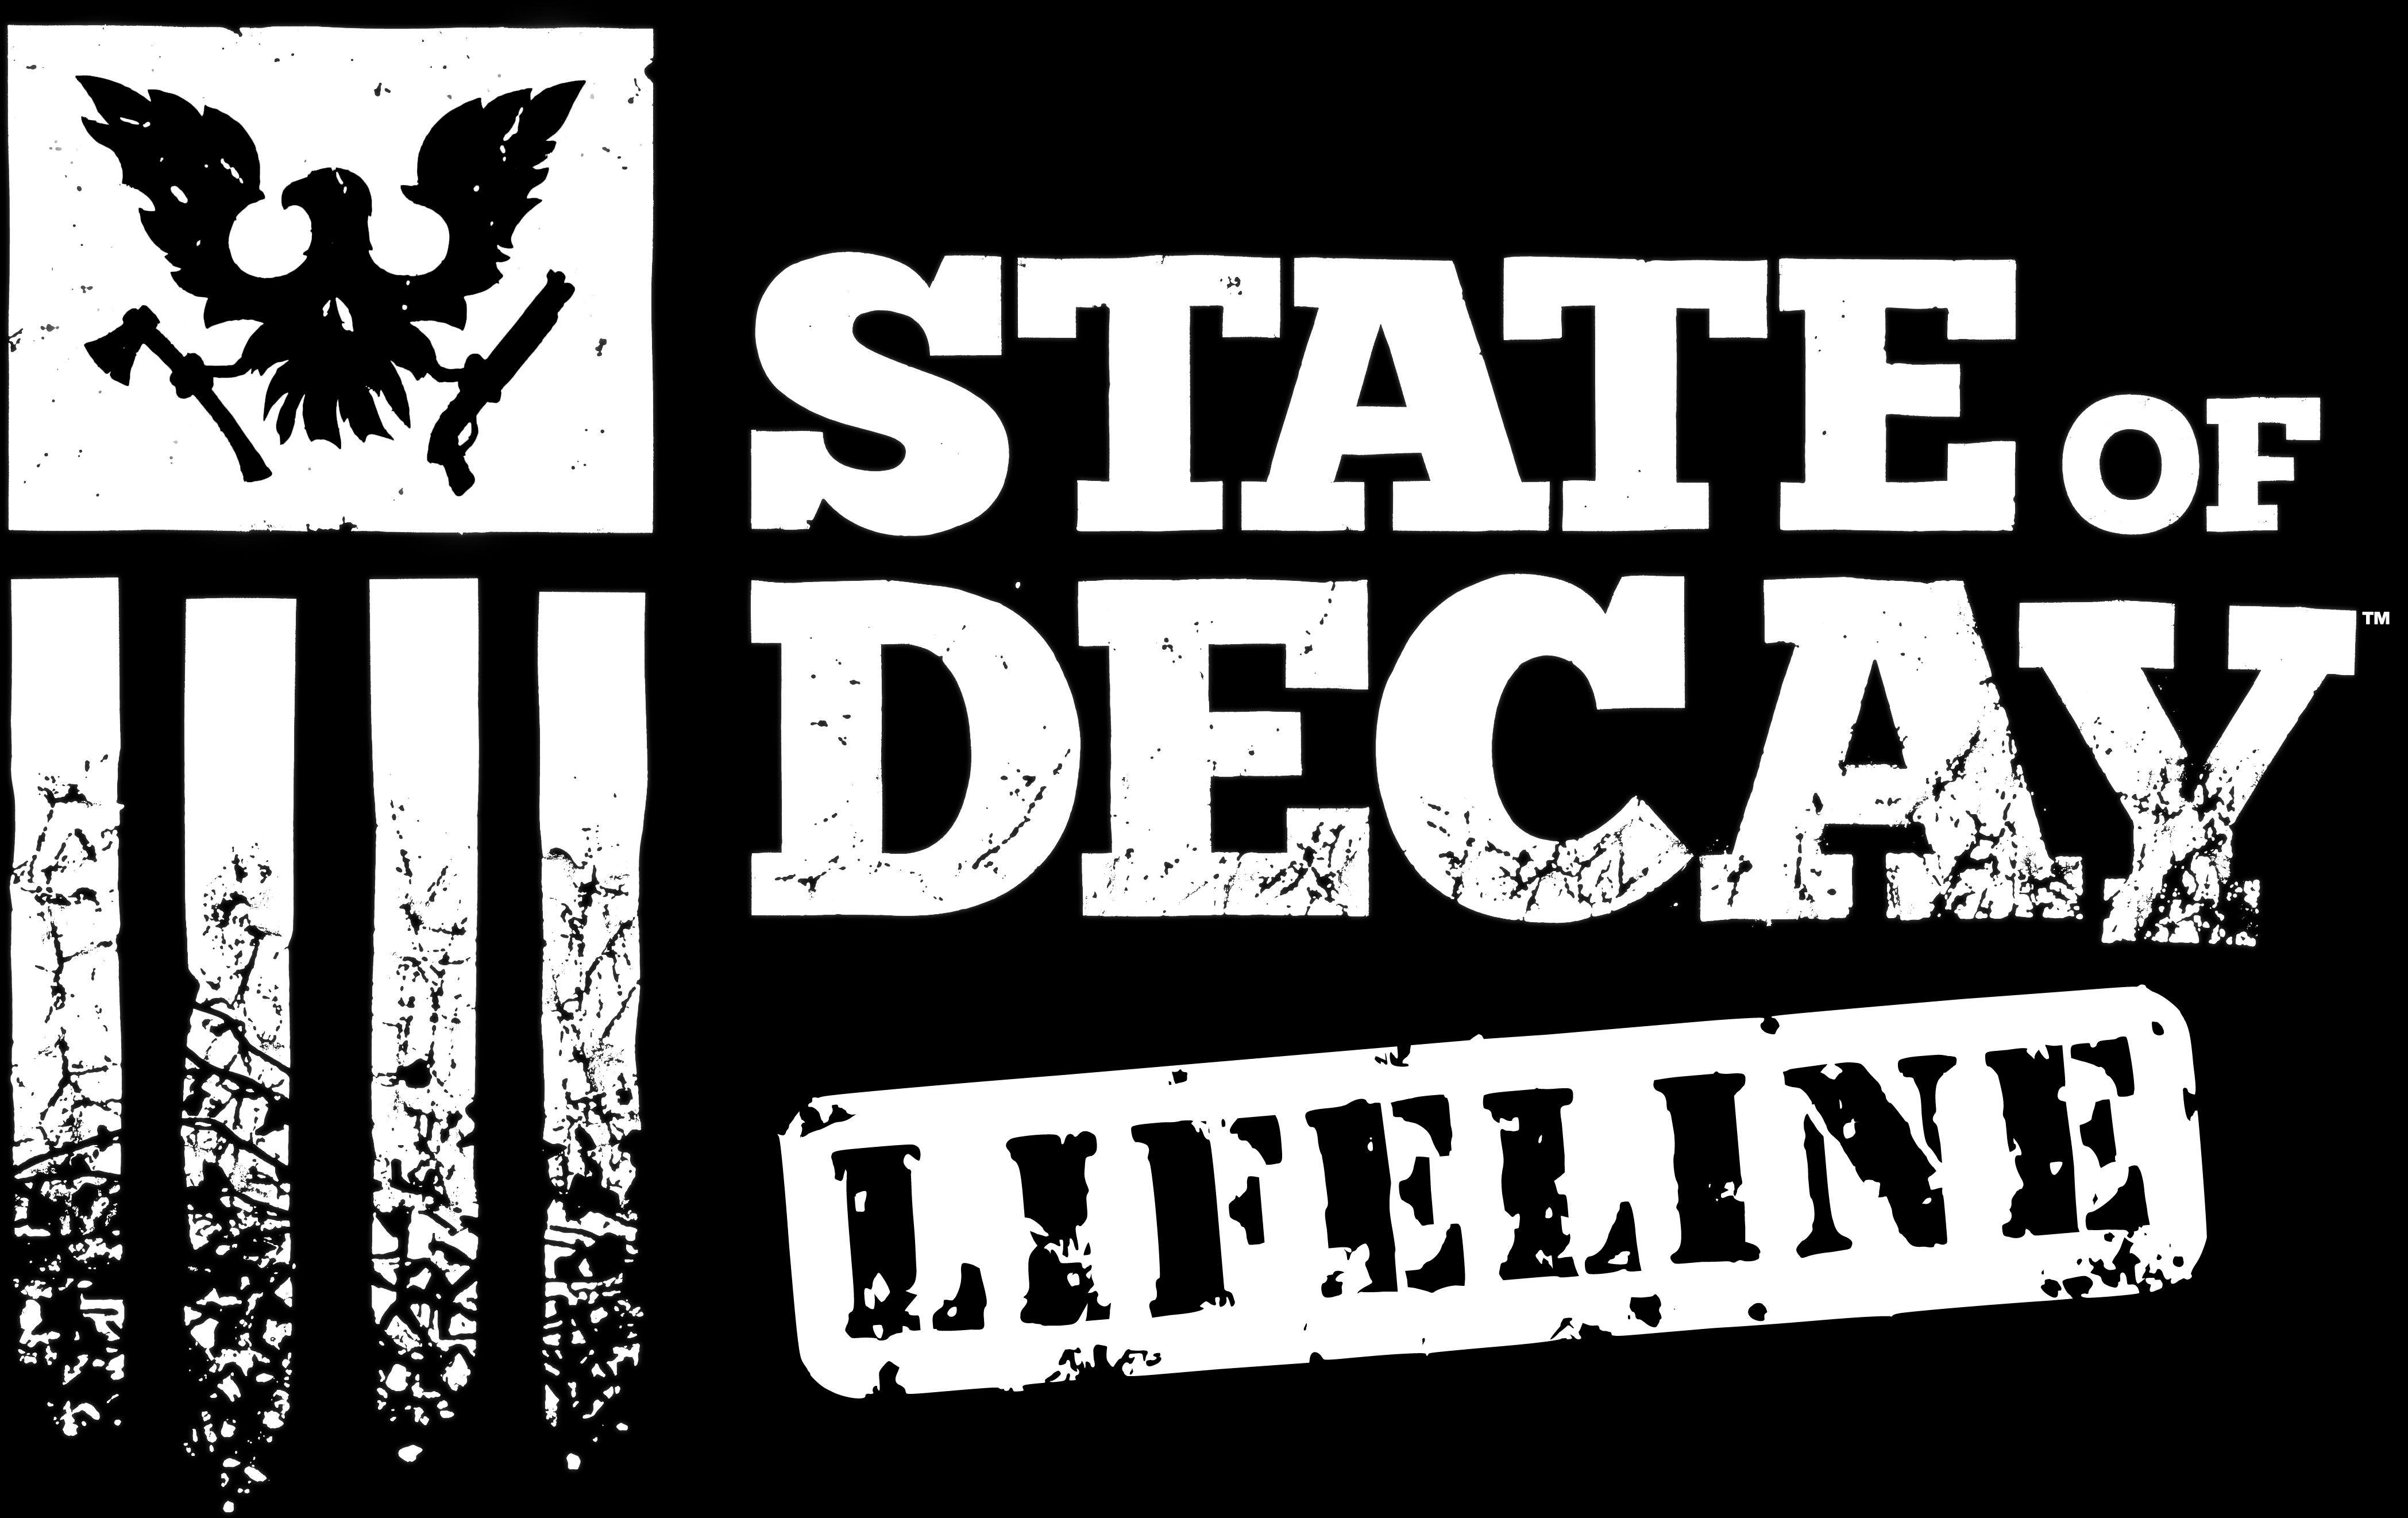 State of Decay Lifeline